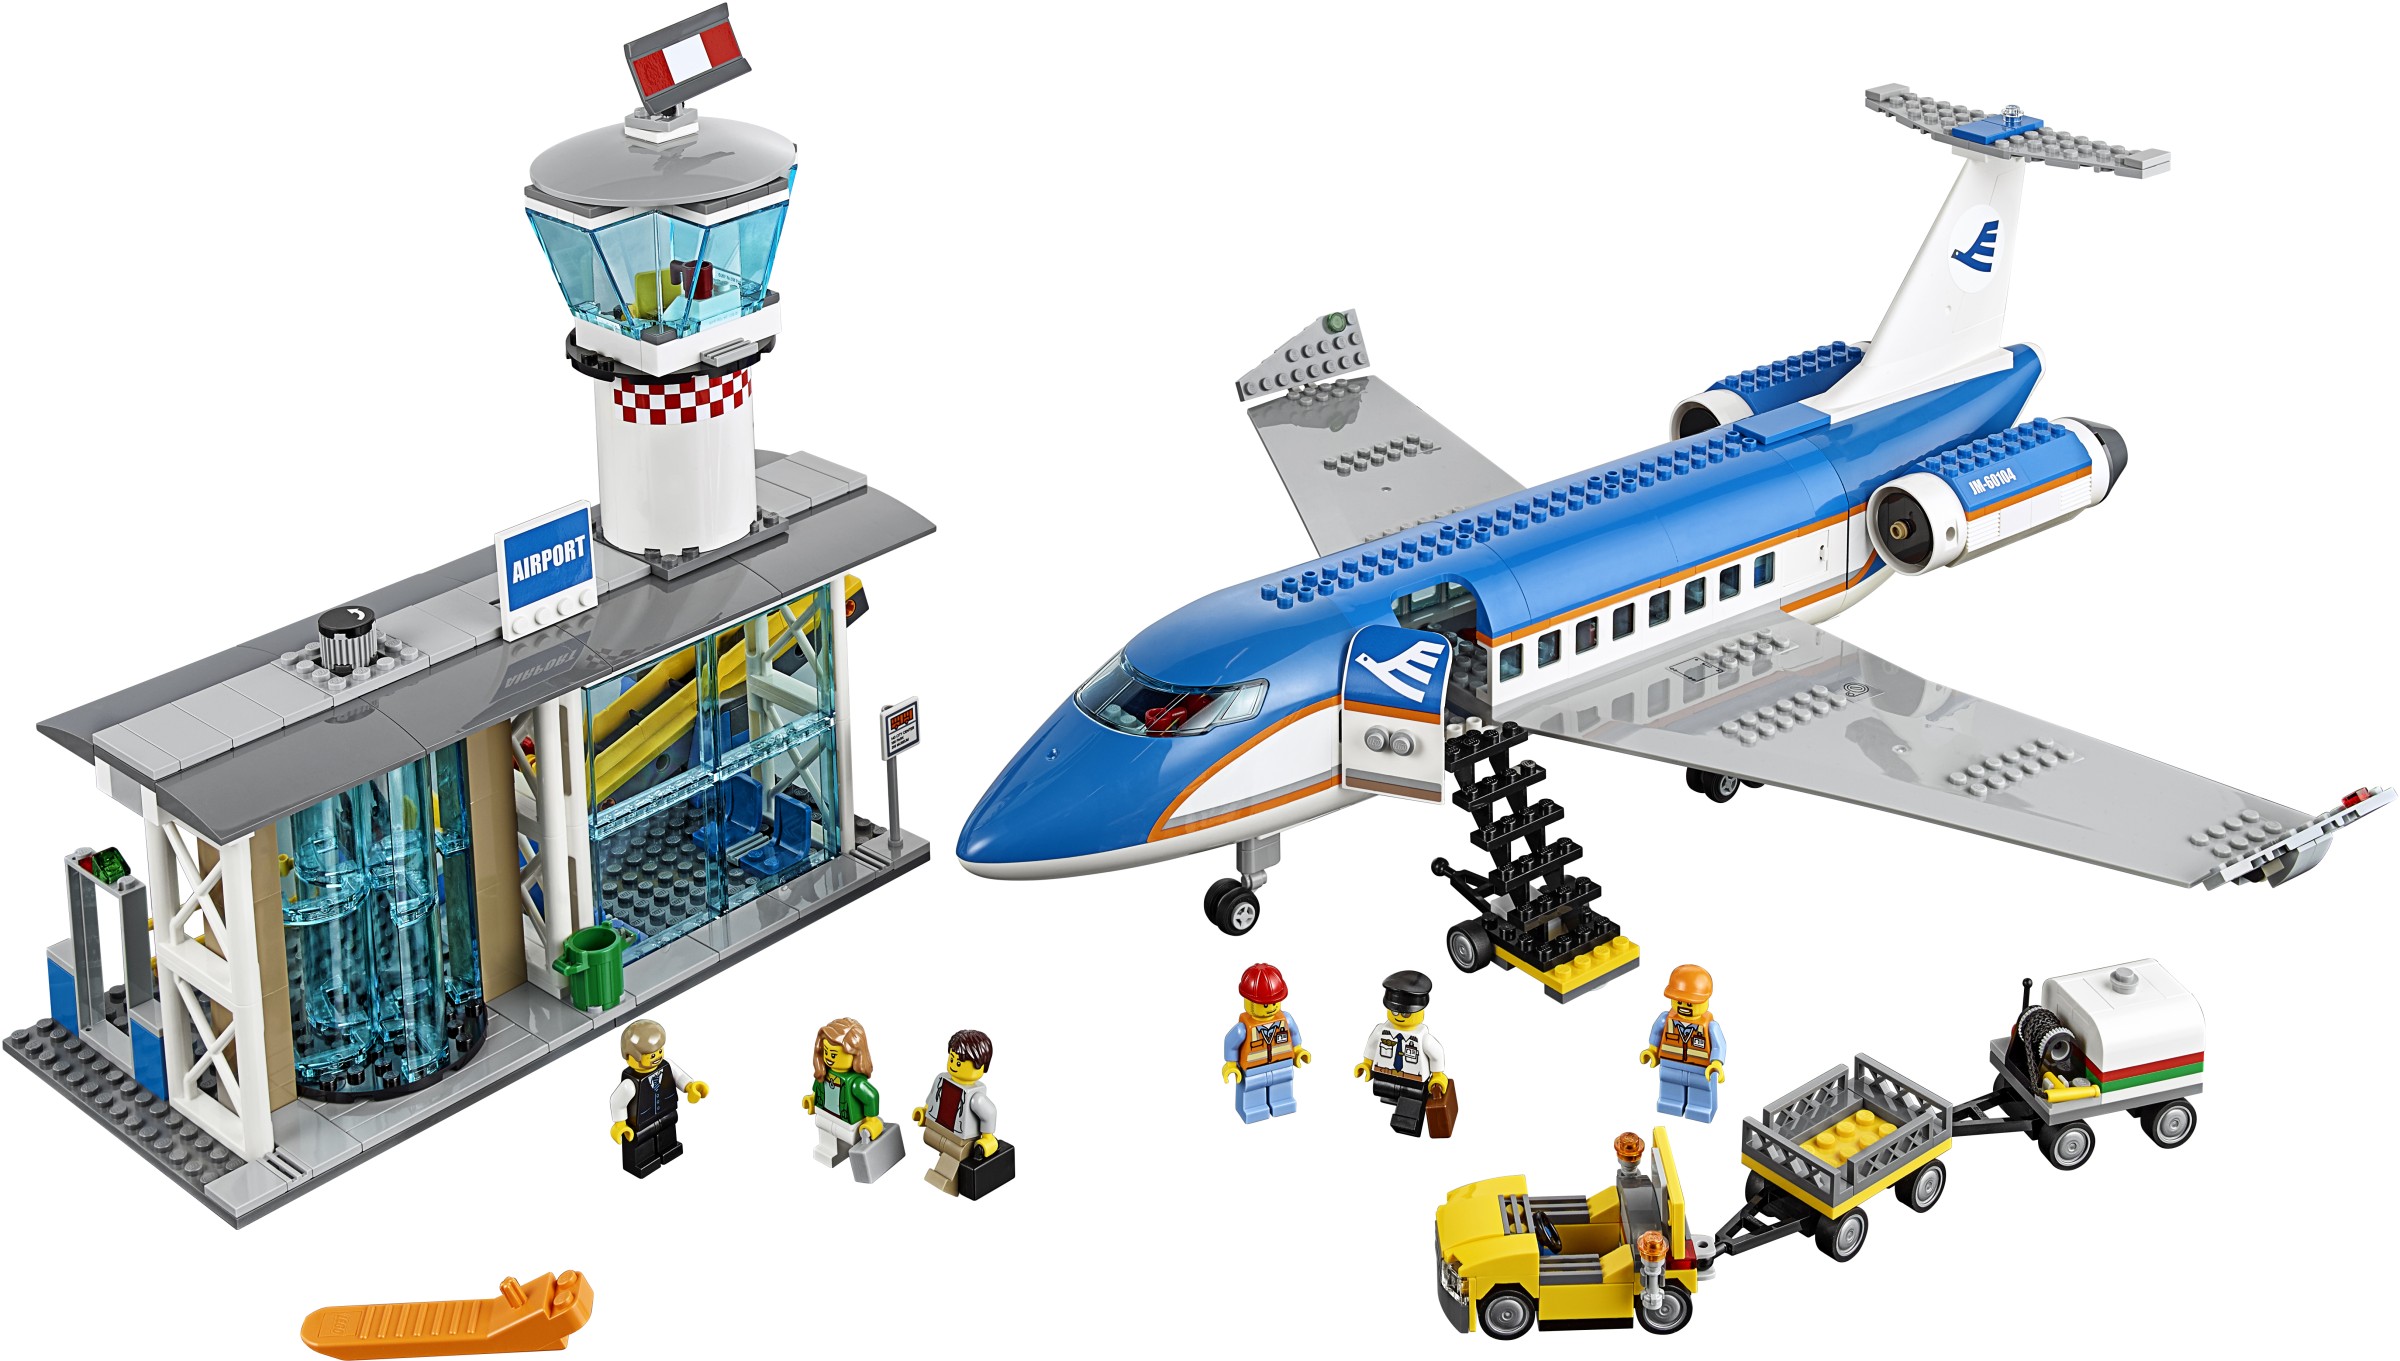 60104 Lego City Airport Terminal and the Airliner